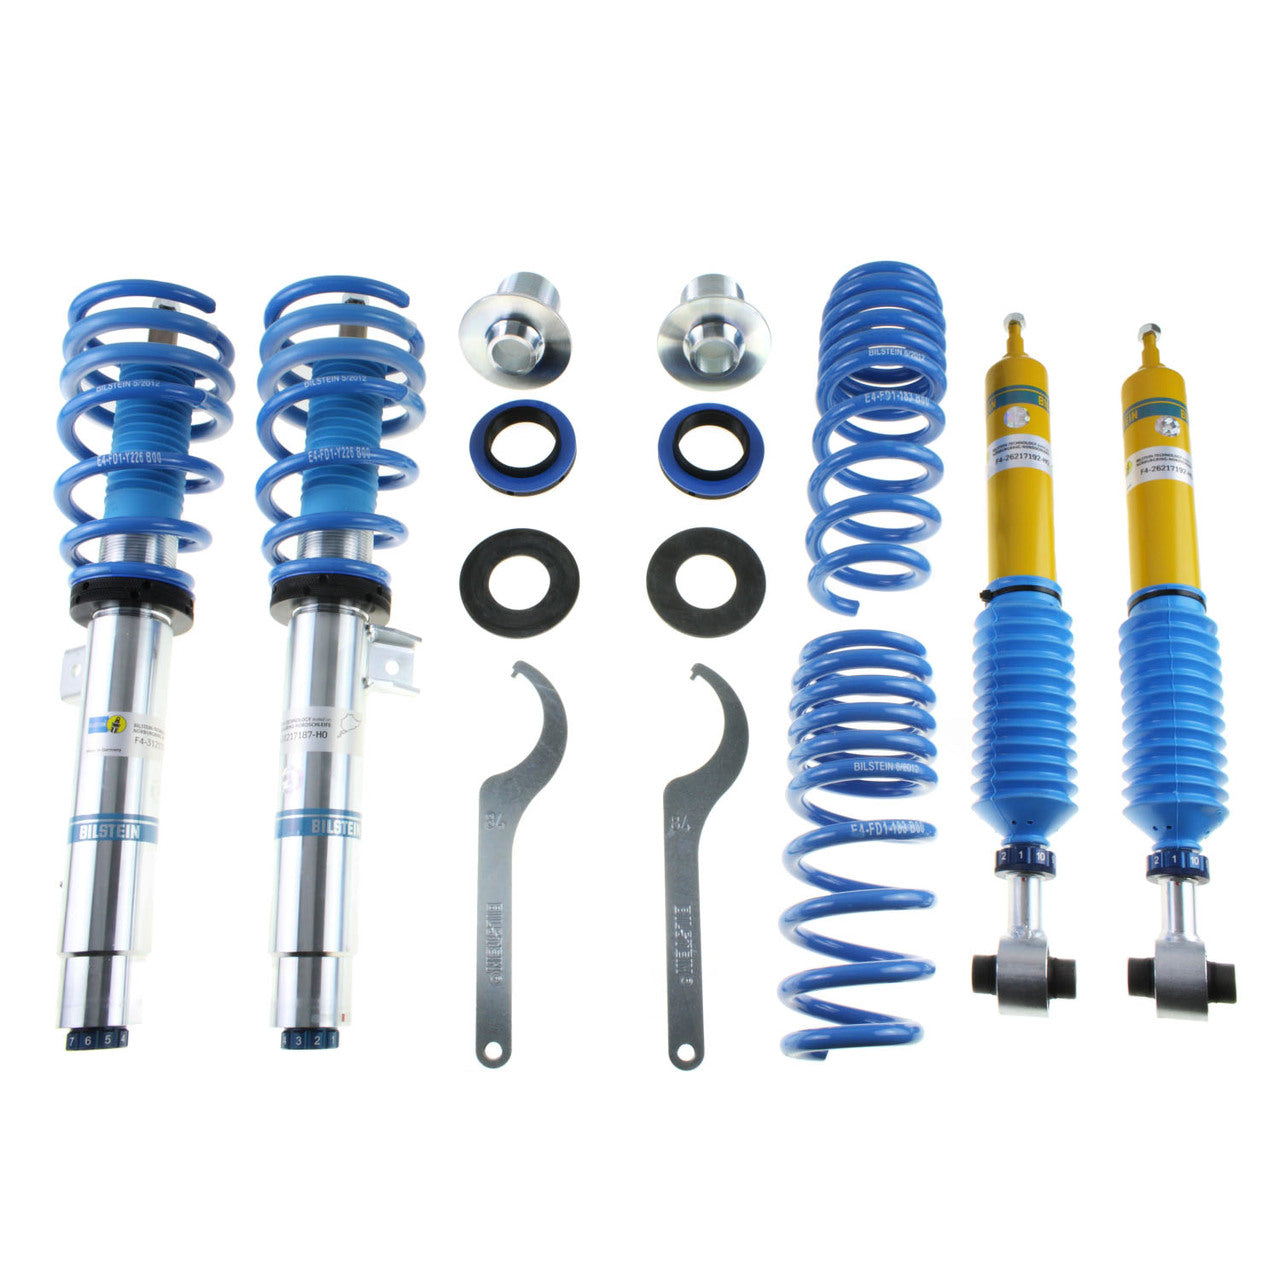  B16 PSS10 Coilover Kit